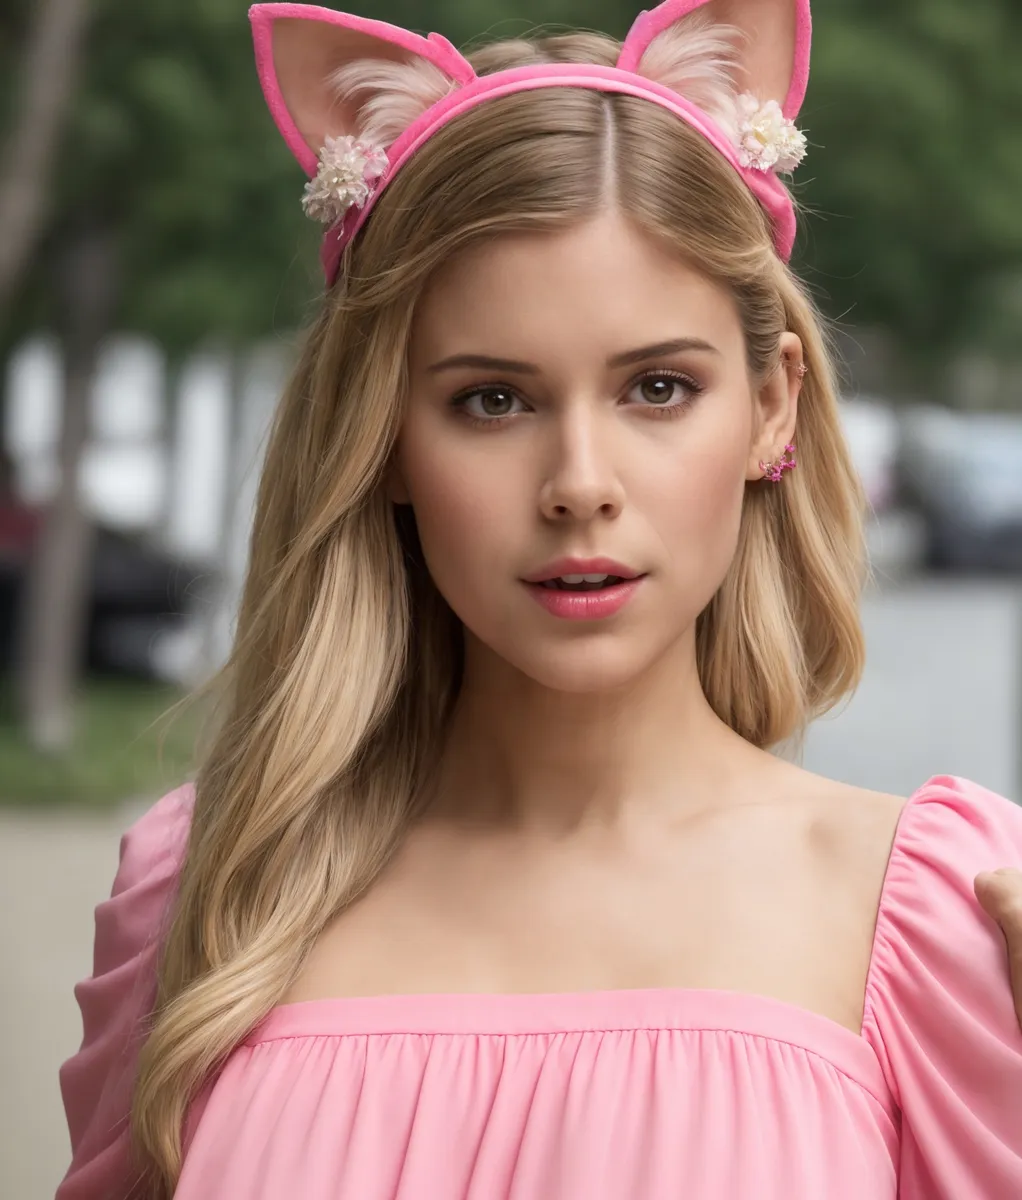 Blonde woman in a pink off-shoulder top, wearing a pink cat ear headband with floral decorations, generated by AI using Stable Diffusion.